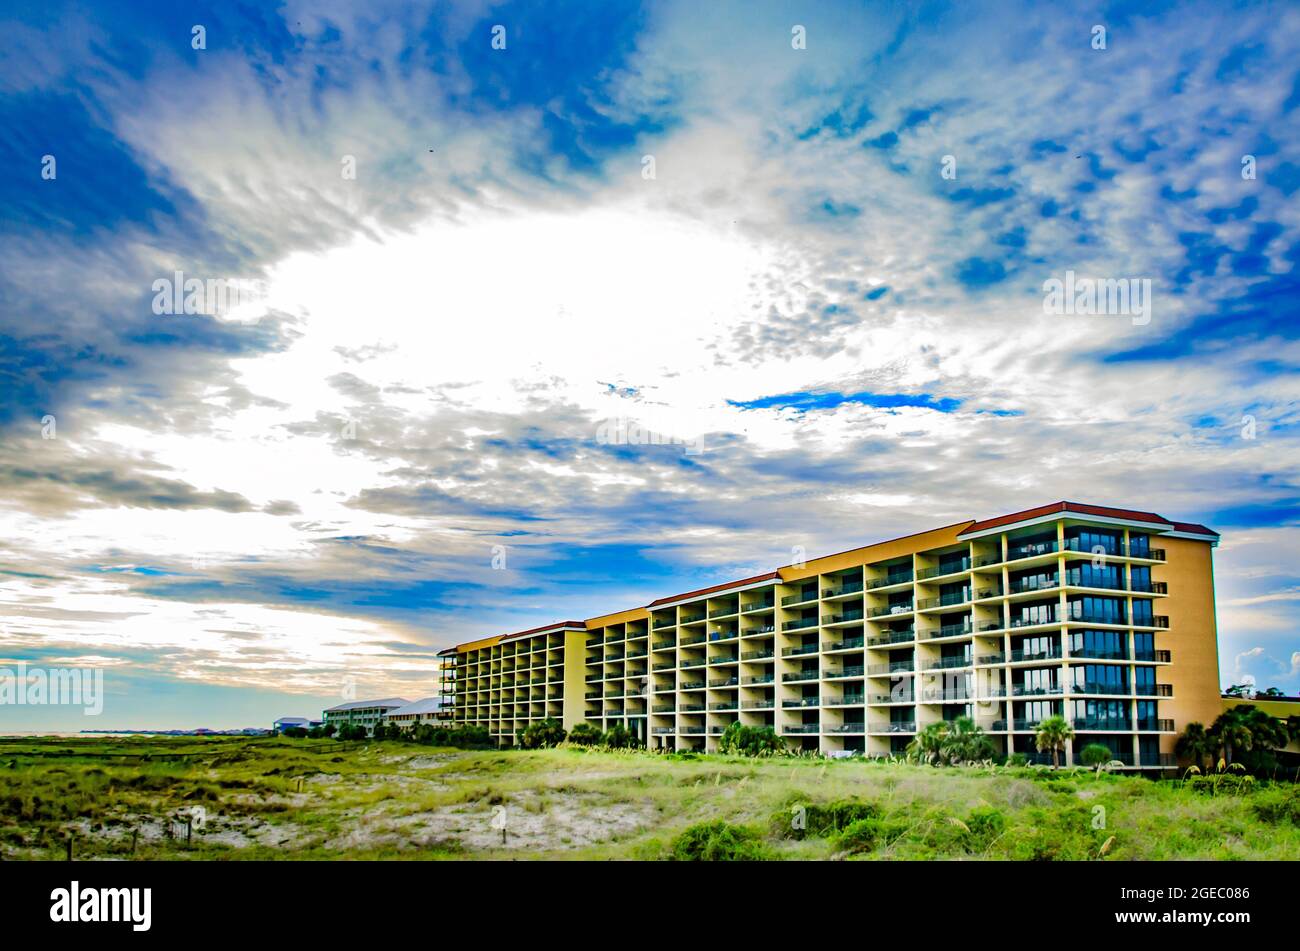 Holiday Isle Resort is pictured, Aug. 12, 2021, in Dauphin Island, Alabama. The resort features 144 rental condominiums on the island's west end. Stock Photo